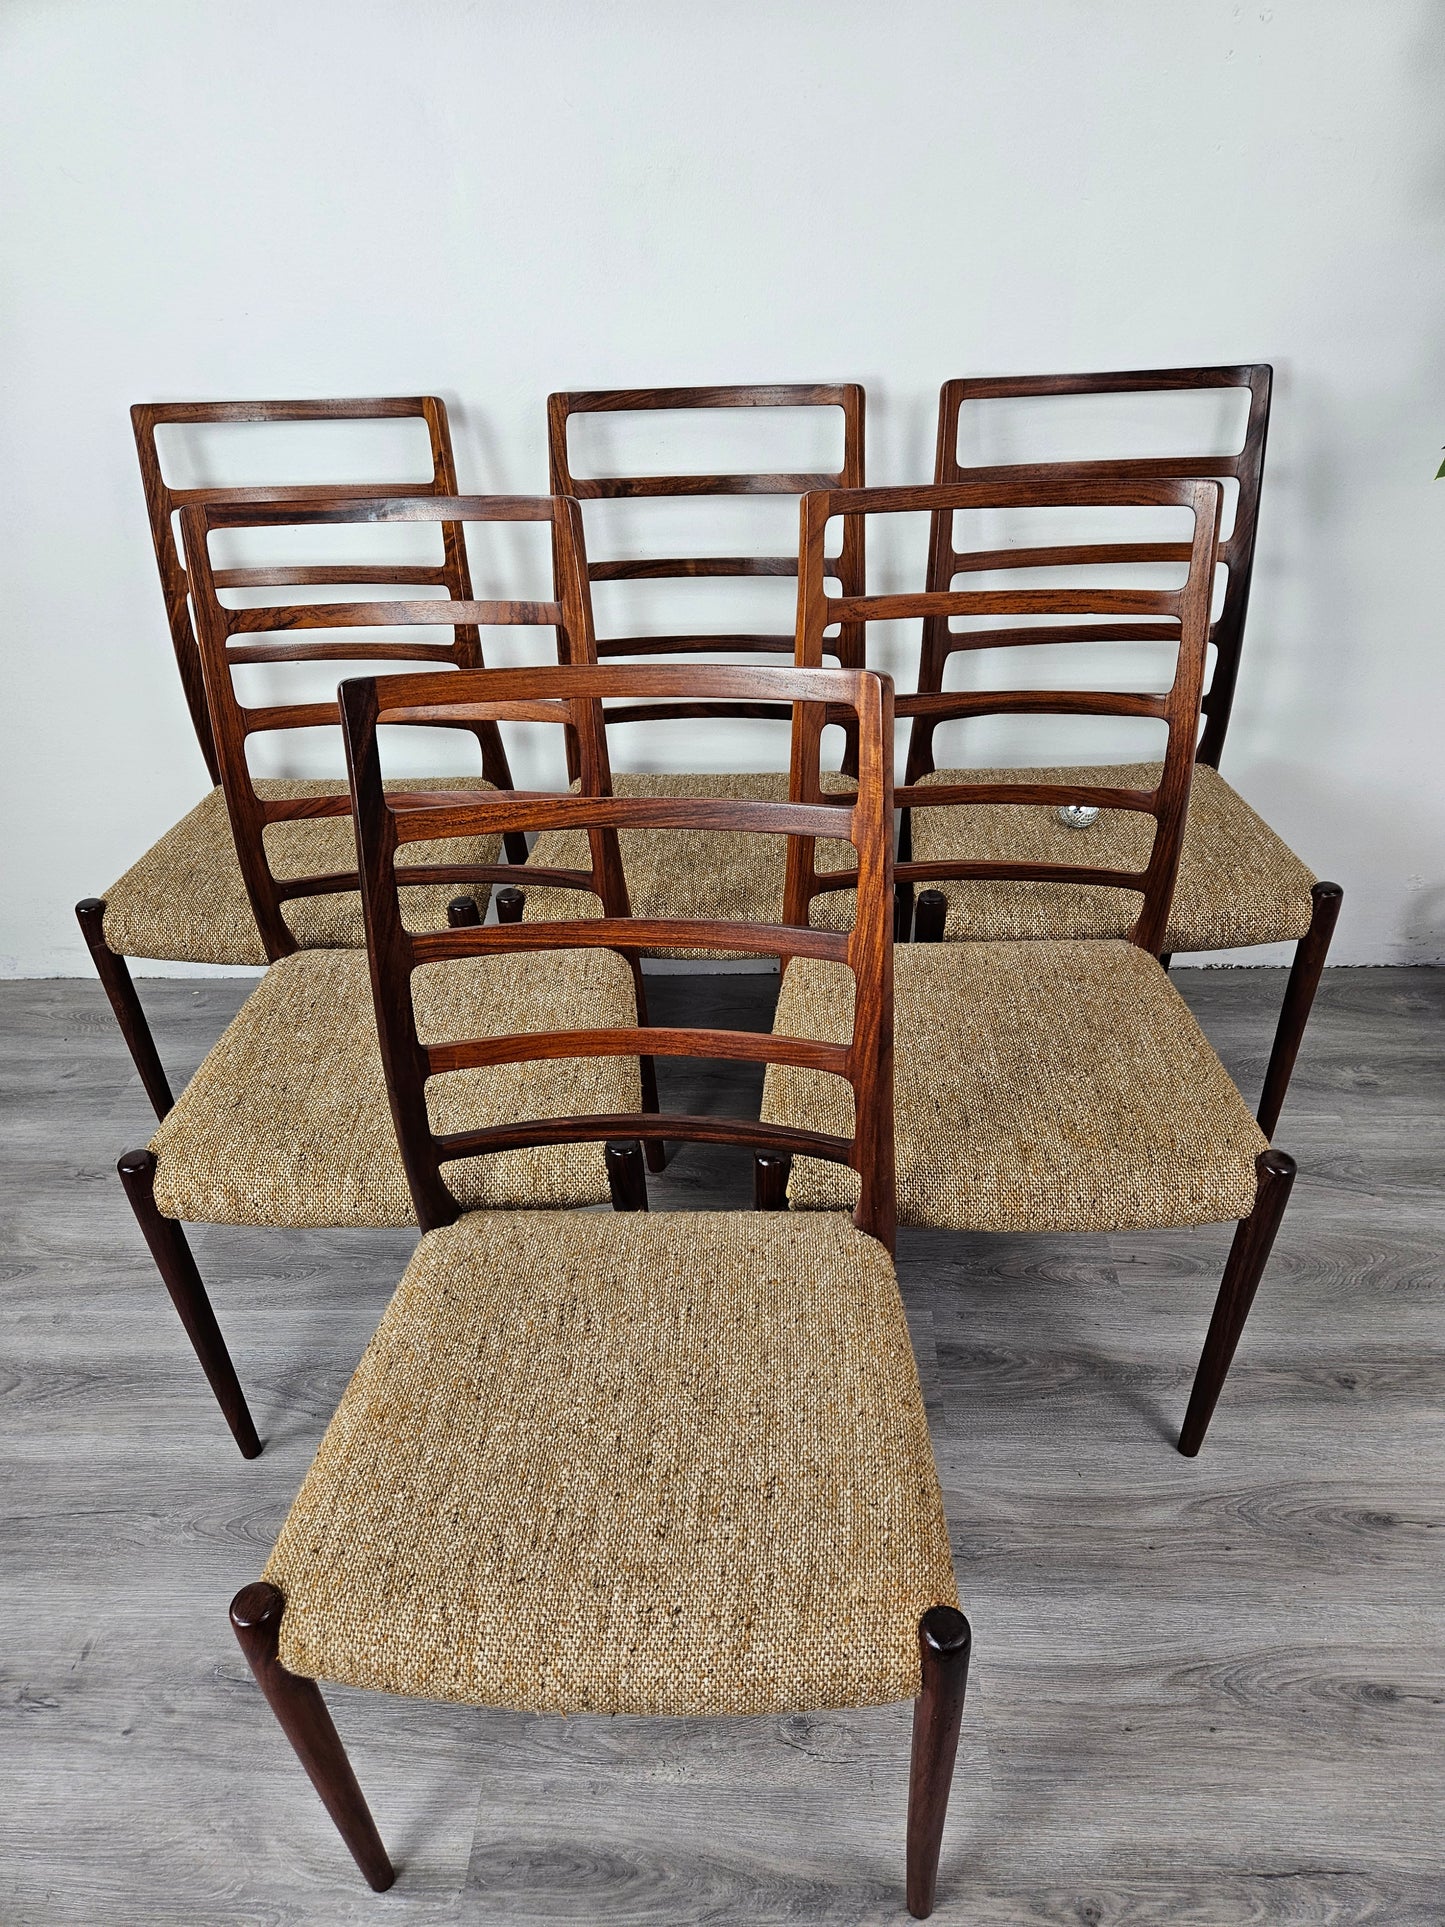 Neils Moller Model 82 Dining Chairs Set of 6